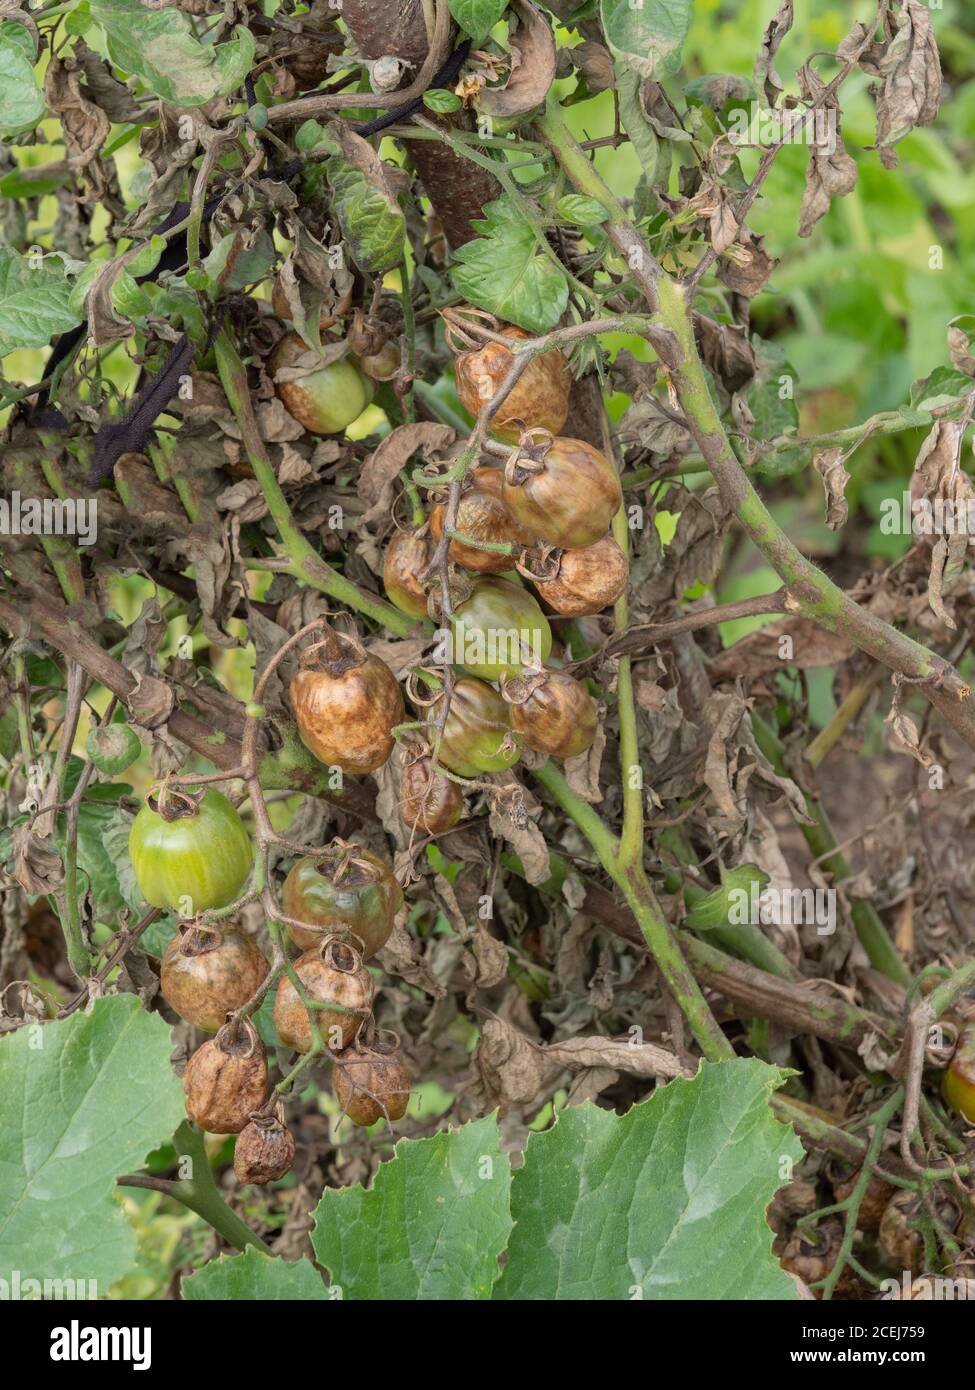 Tomato plant and its tomatoes seen badly affected by tomato blight. Stock Photo